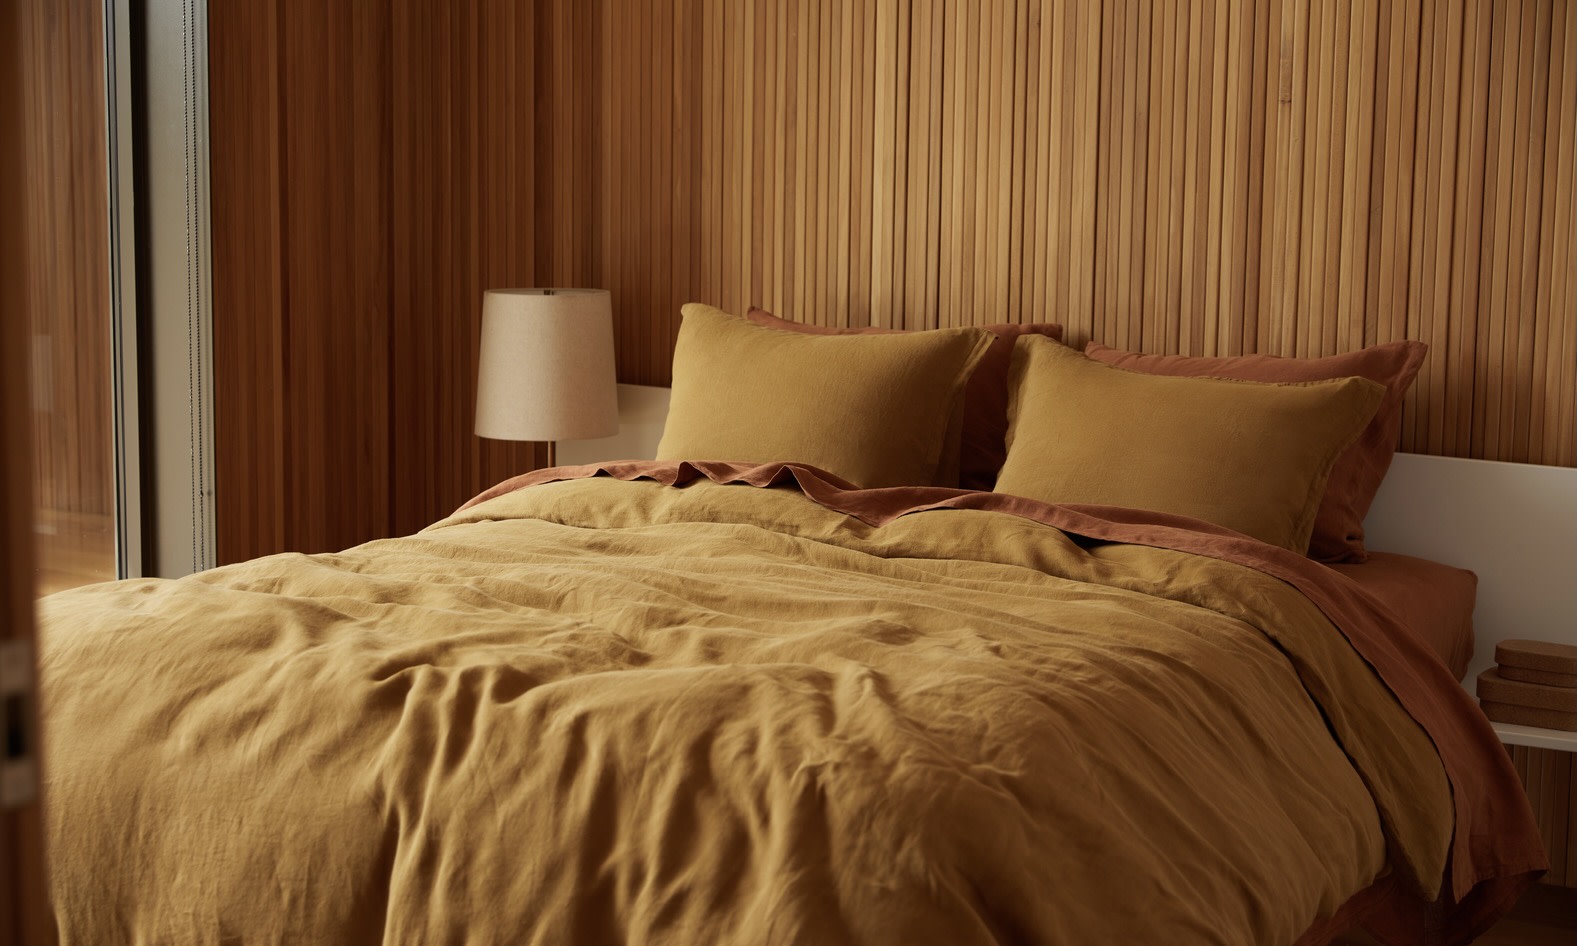 Bed Sheet Color Trends: Which Bed Sheet Colors Are Popular Right Now?